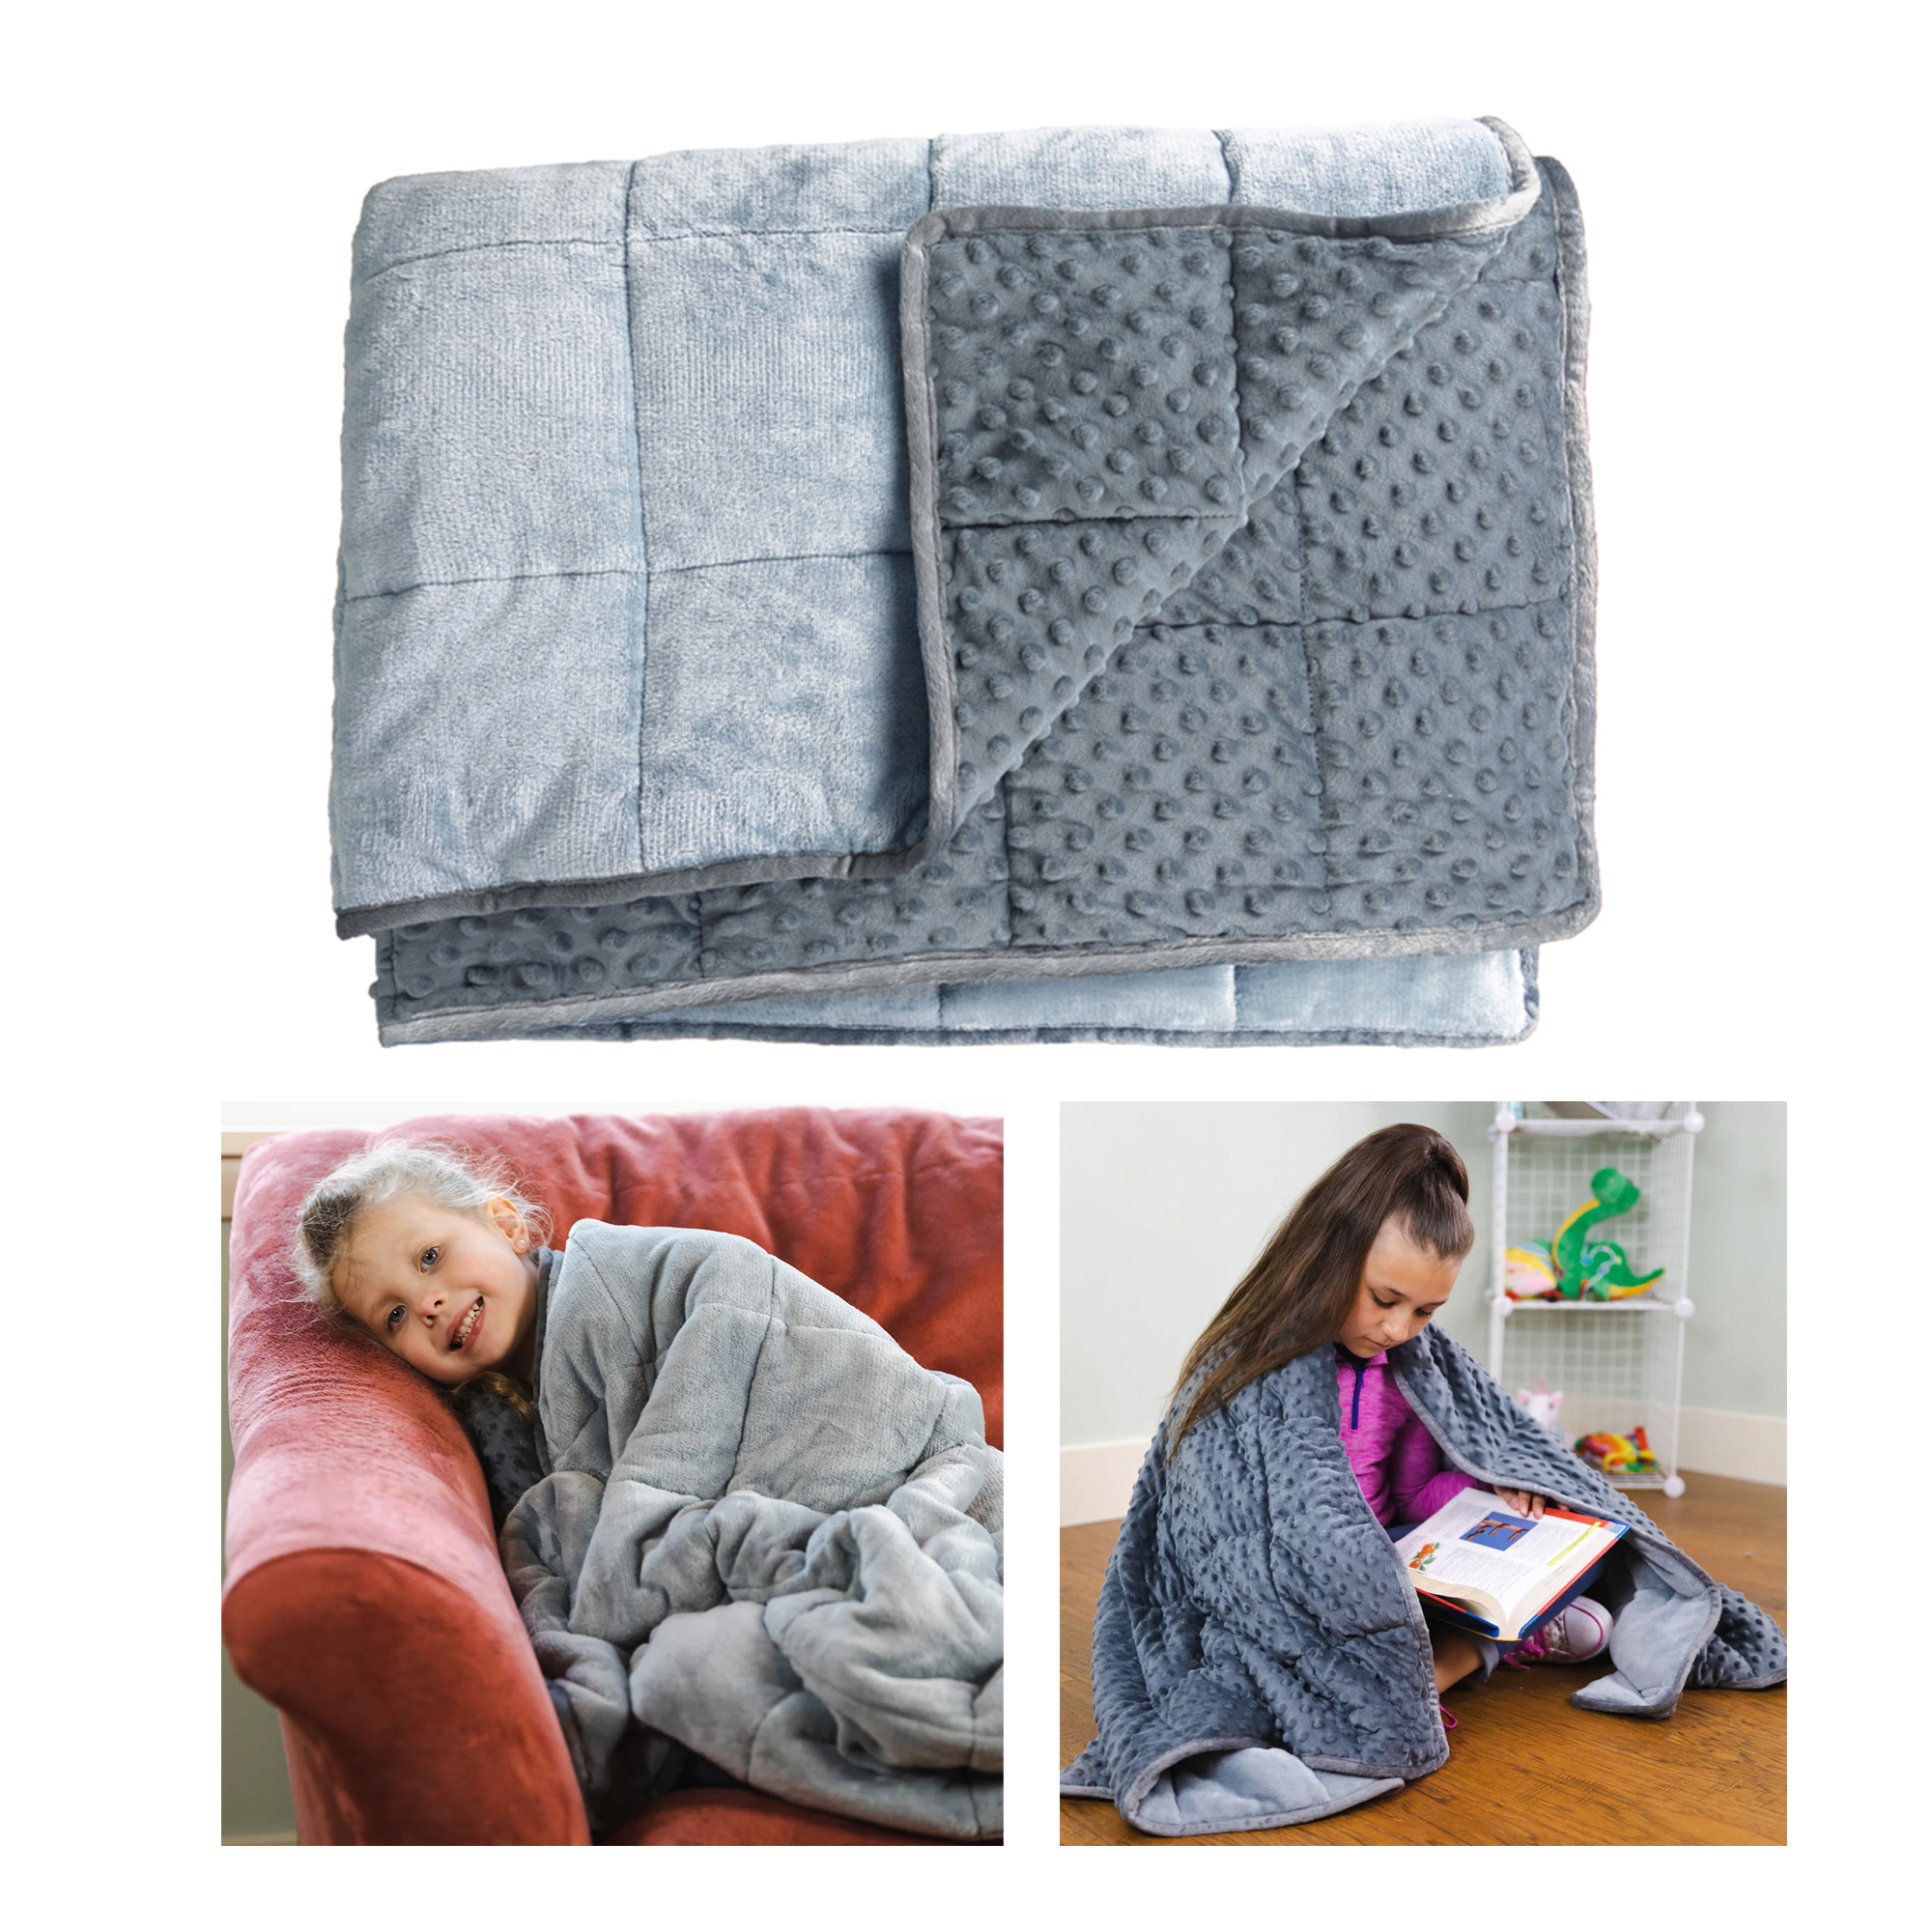 Bouncyband Soft Fleece Weighted 10lb Medium Sensory Blanket for Kids, 65" x 45" image number null